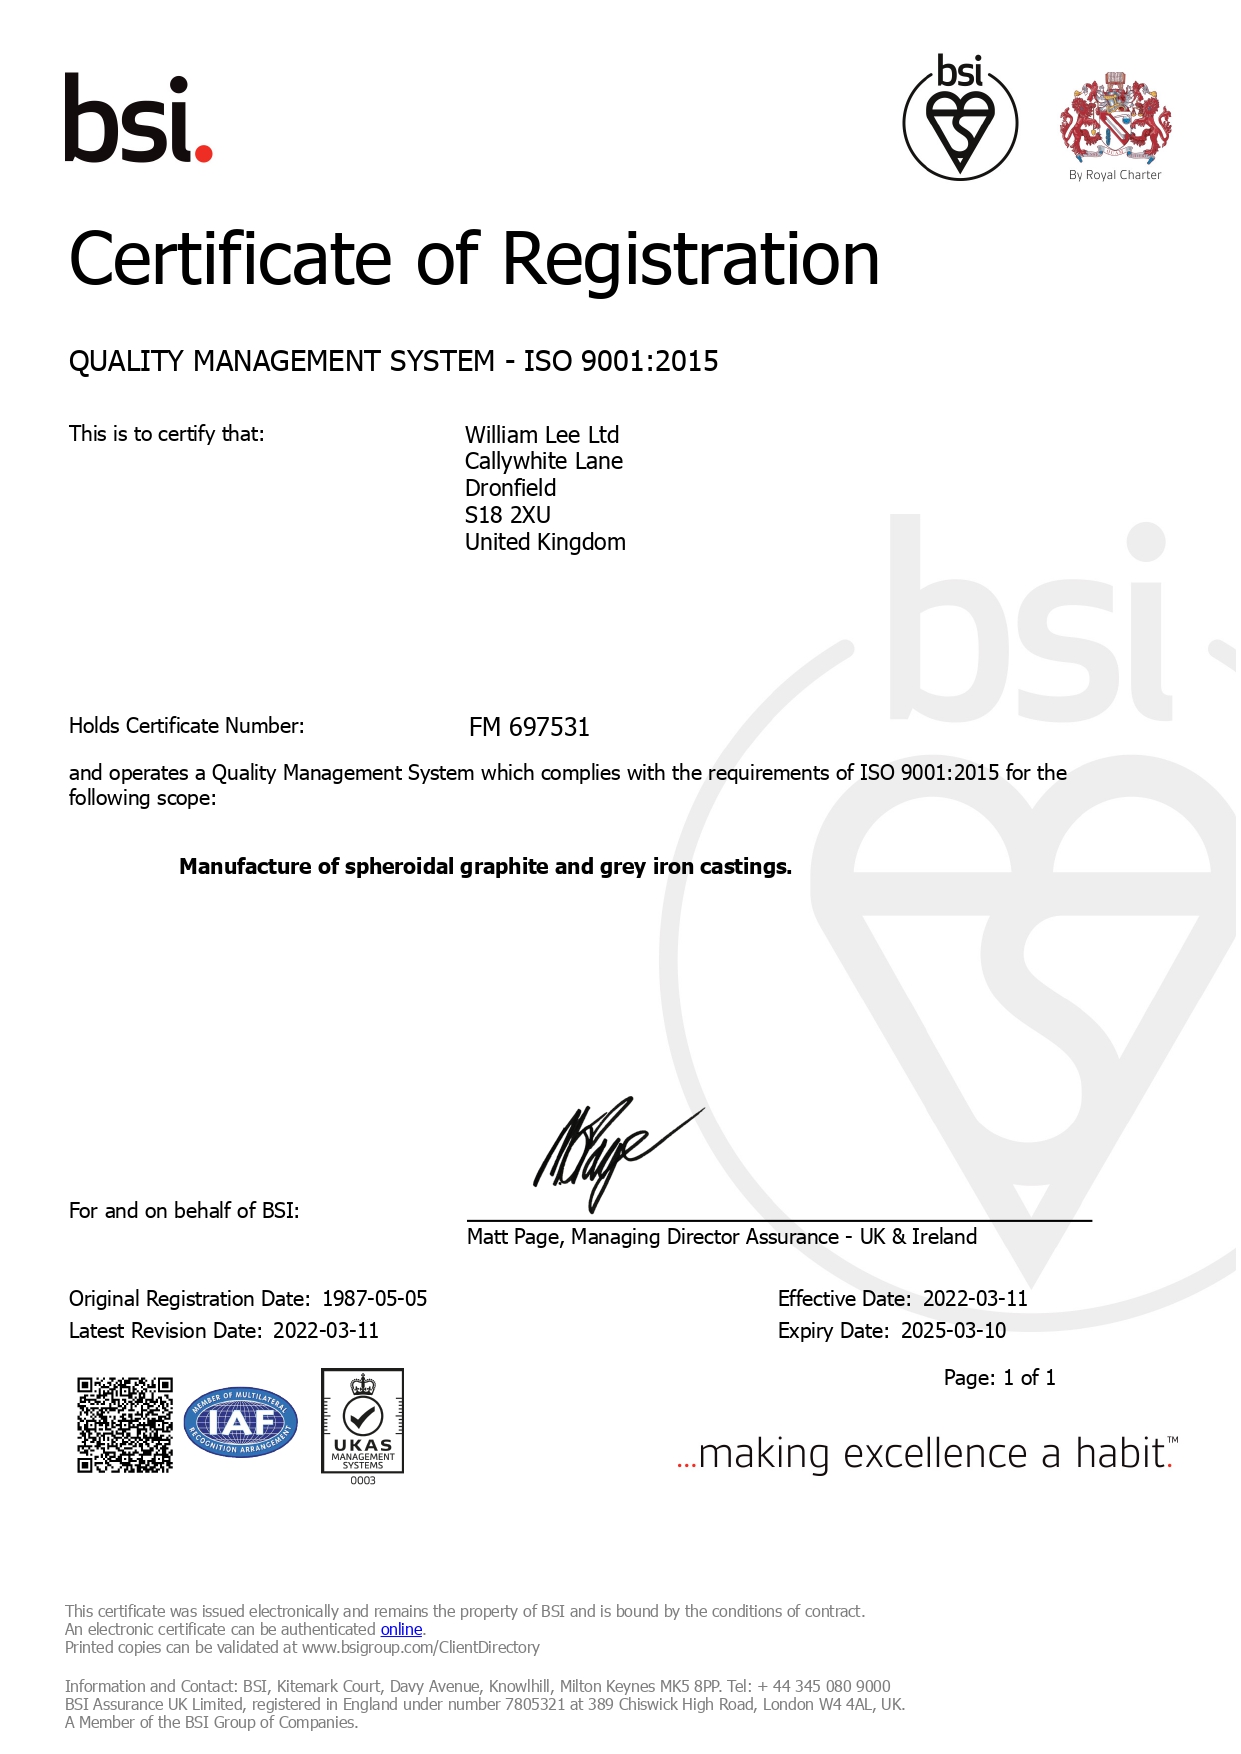 ISO9001 WMLee Mar 2022 - Mar 2025 FM 697531_page-0001